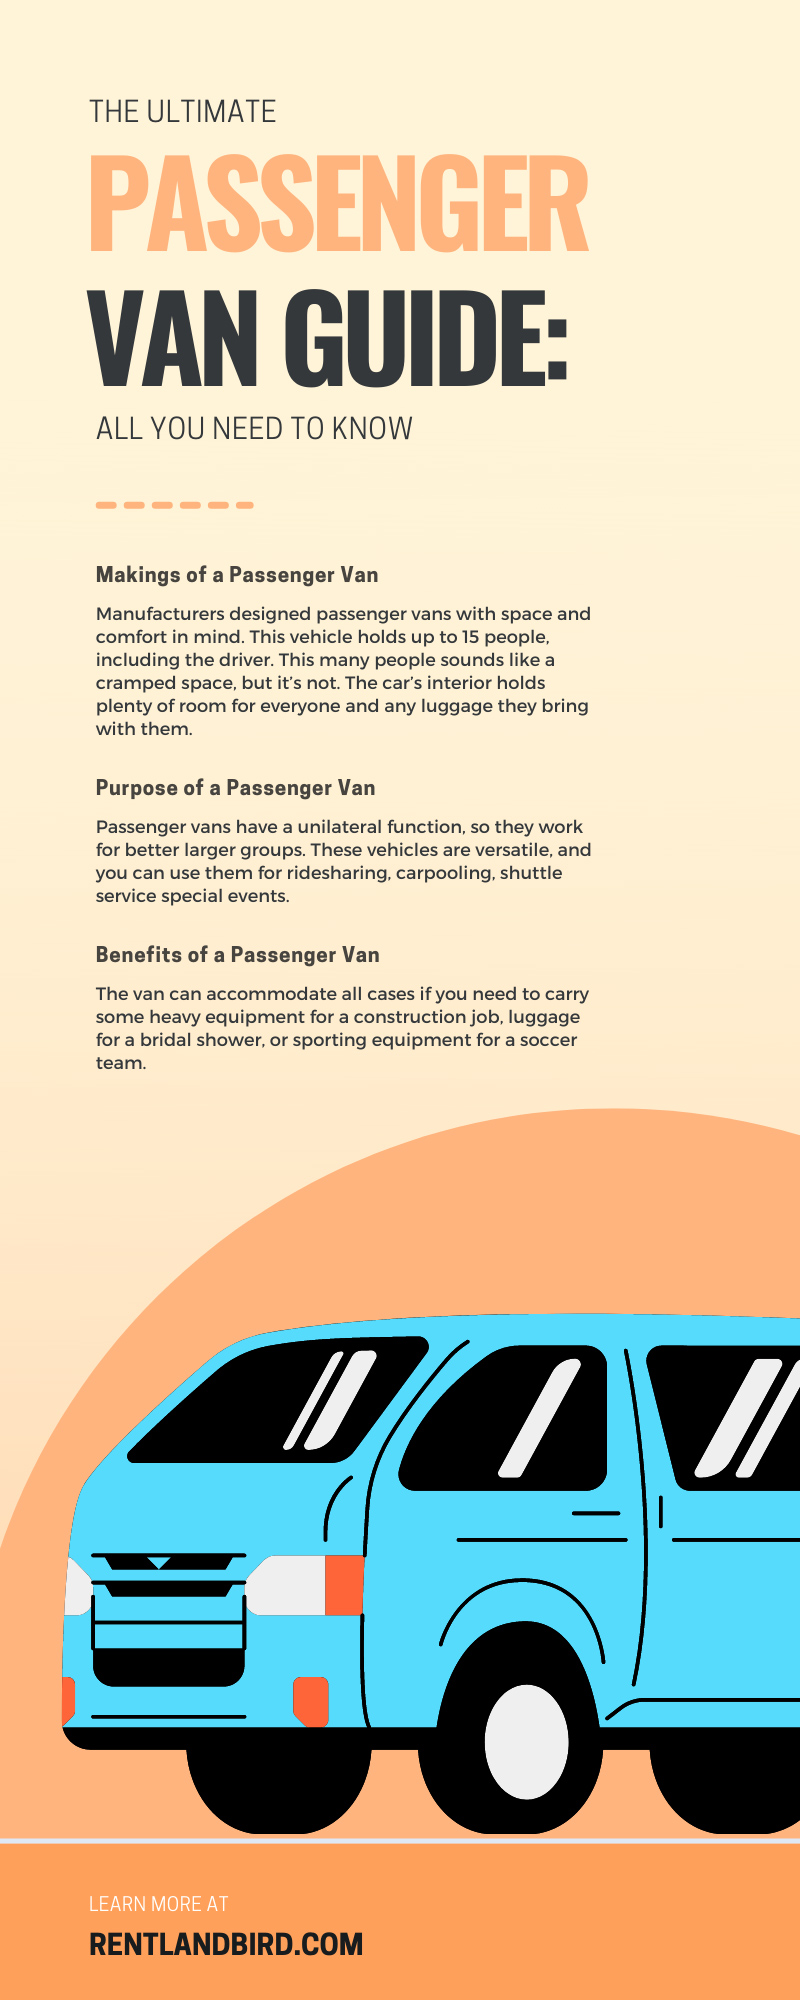 The Ultimate Passenger Van Guide: All You Need To Know